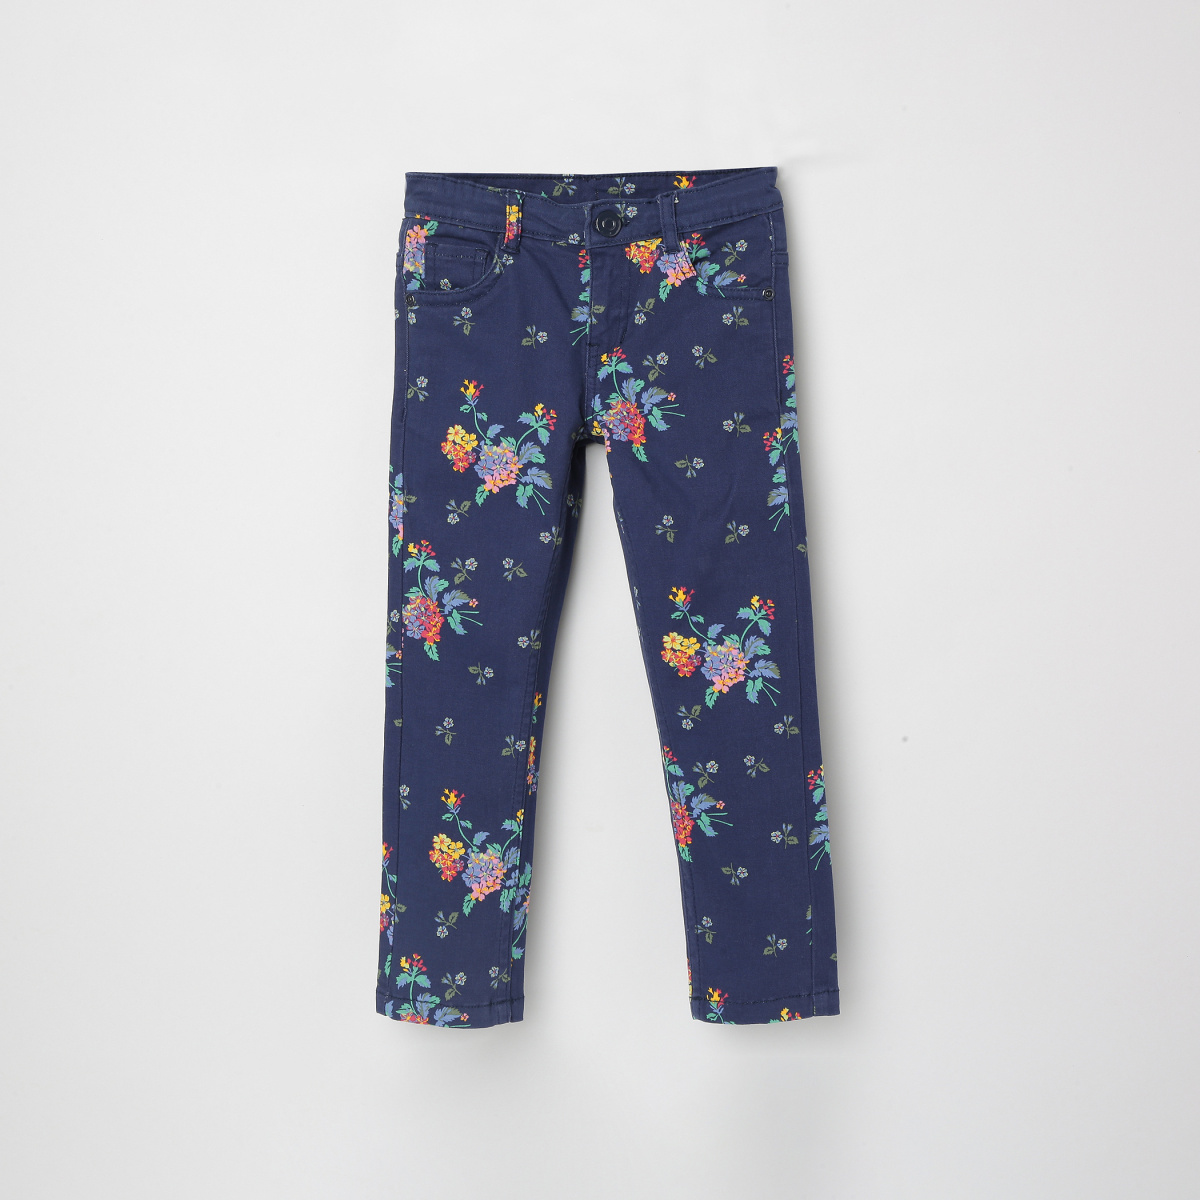 Buy Peach Floral Printed Cotton Slim Pants Online - W for Woman